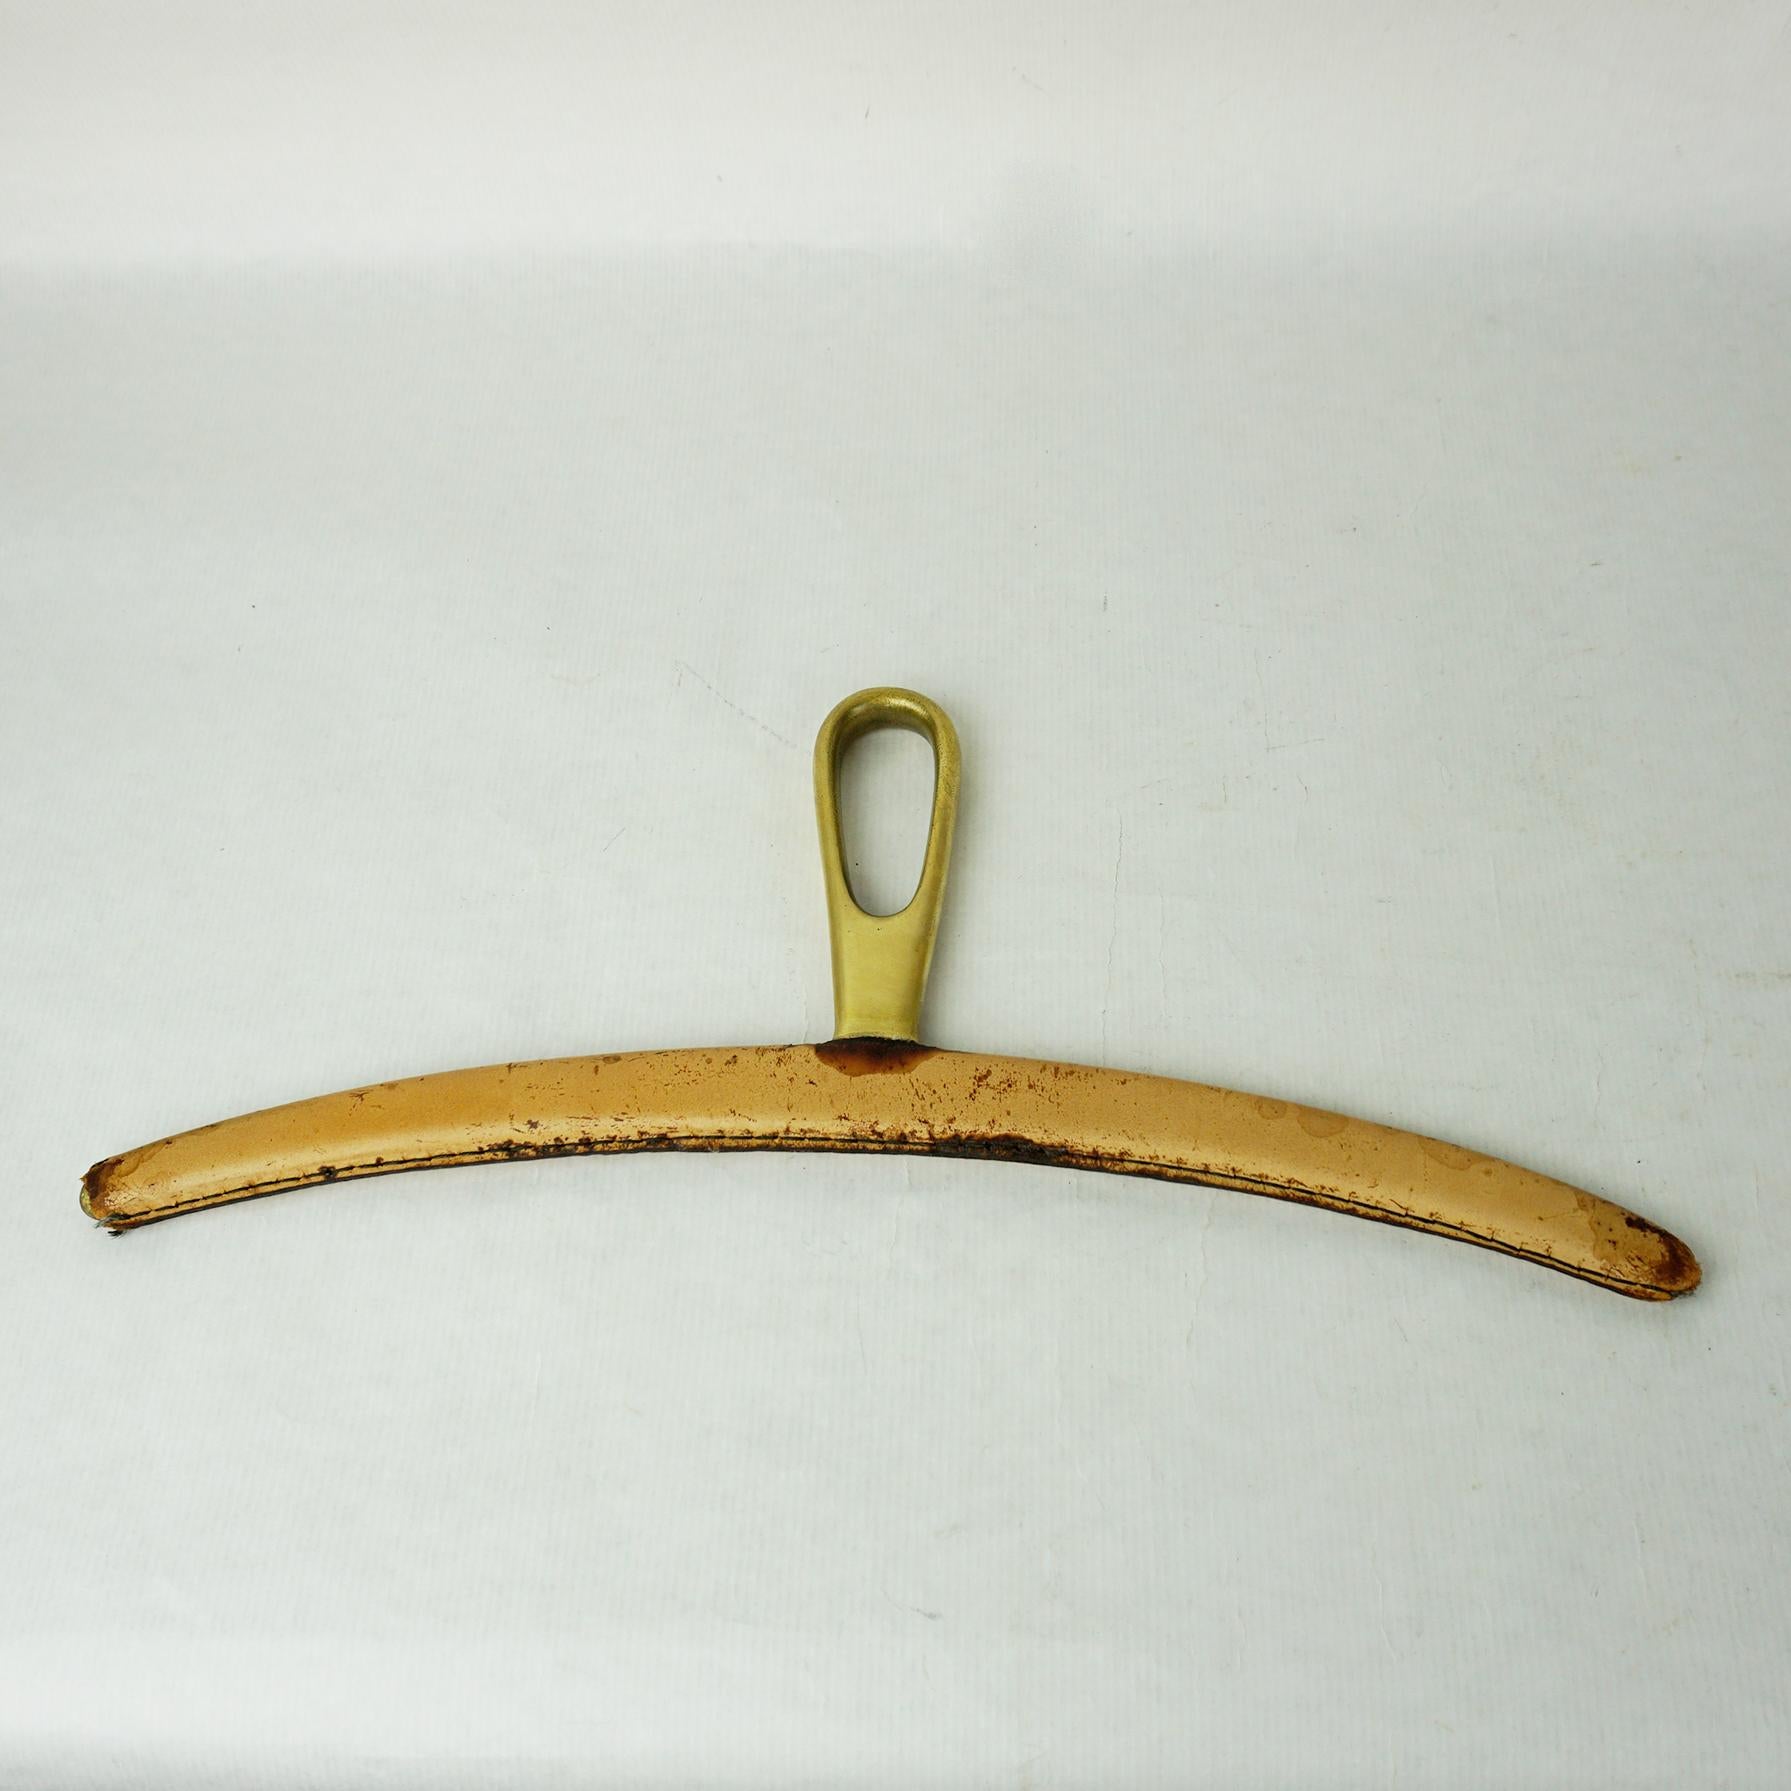 This rare brass and cognac brown leather cloth hangers have been designed and manufactured by Carl Auböck in the 1950s in Vienna Austria, Mod. no. 3664. one of them marked Auböck.
As the brass remains in beautiful condition the handstitched cognac